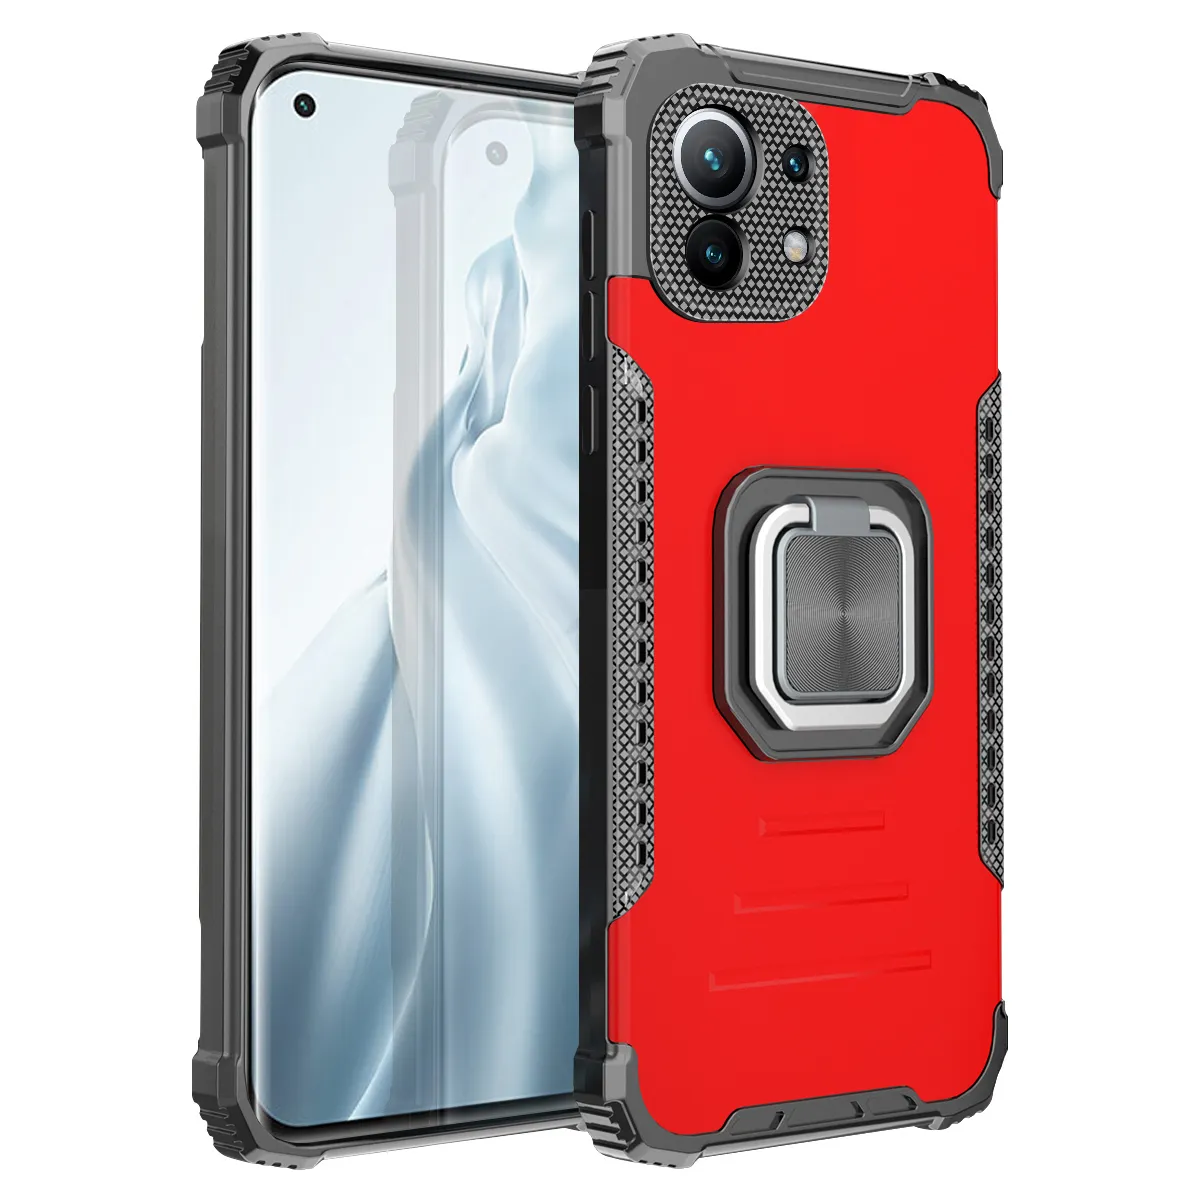 Aluminum Alloy Magnetic Cover Armature With Ring Holder Shockproof Cases For Xiaomi Mi 11 Note 10 Lite Redmi 9t 9 Power